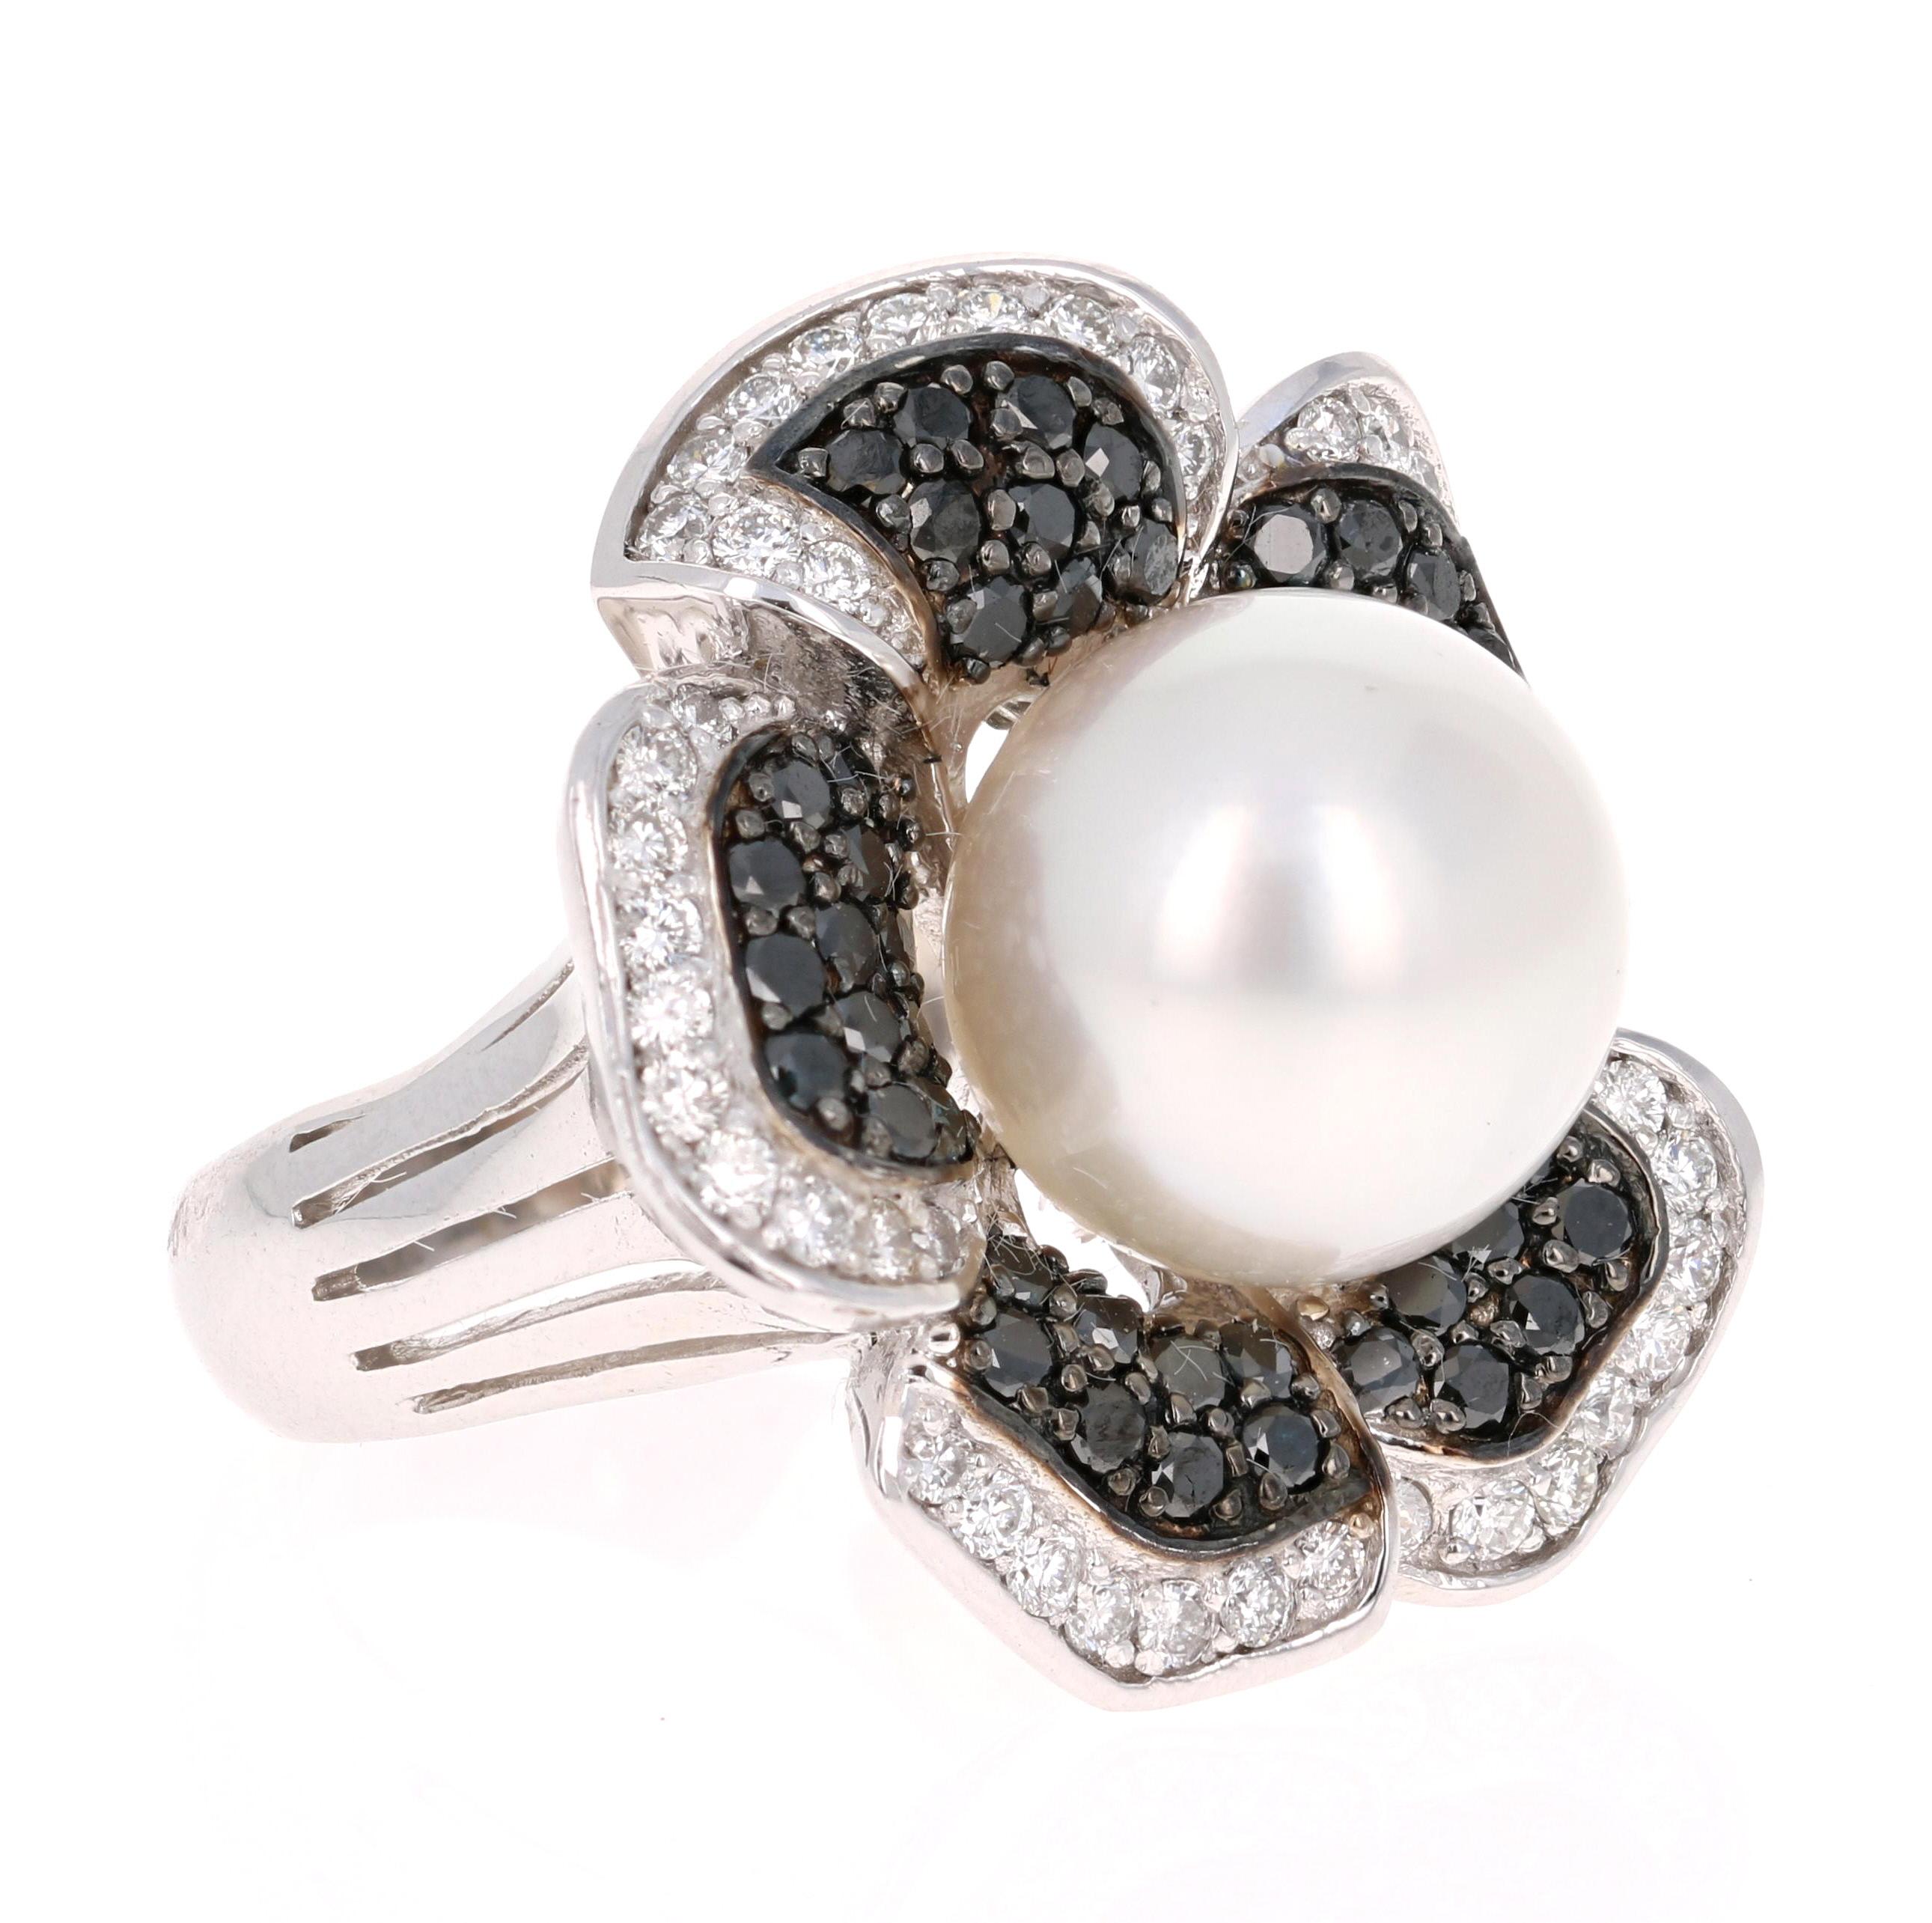 This beautiful flower like ring has a stunning South Sea Pearl that is set in the center of the ring.  The pearl is surrounded by a cluster of 49 Black Round Cut Diamonds that are set a petal like design.  The Black Diamonds weigh 1.26 carats, these